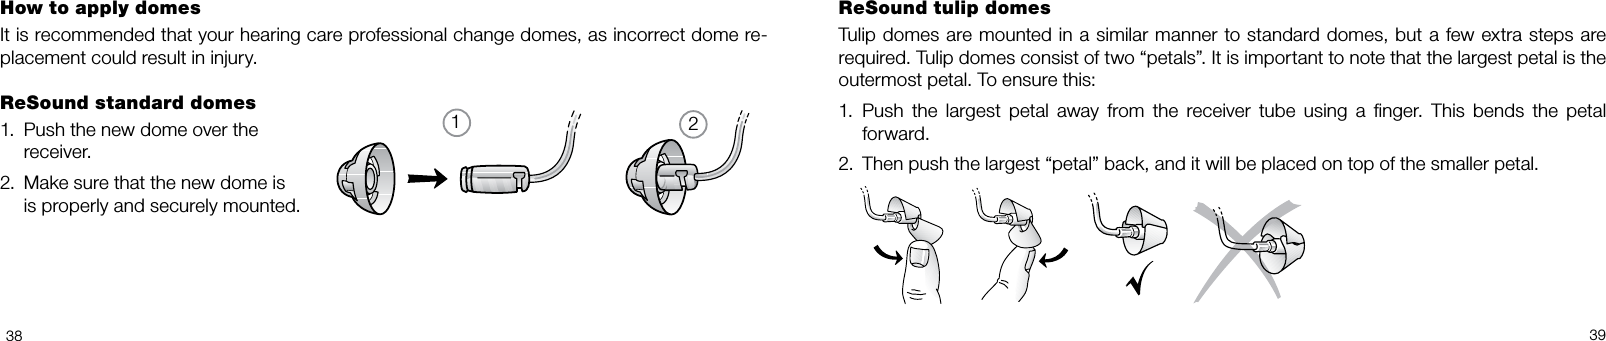 123839How to apply domesIt is recommended that your hearing care professional change domes, as incorrect dome re-placement could result in injury.ReSound standard domes1.  Push the new dome over the   receiver.2.  Make sure that the new dome is   is properly and securely mounted.ReSound tulip domesTulip  domes are mounted in a similar manner to standard  domes, but a few extra  steps are required. Tulip domes consist of two “petals”. It is important to note that the largest petal is the outermost petal. To ensure this:1.  Push  the  largest  petal  away  from  the  receiver  tube  using  a  nger.  This  bends  the  petal forward.2.  Then push the largest “petal” back, and it will be placed on top of the smaller petal.